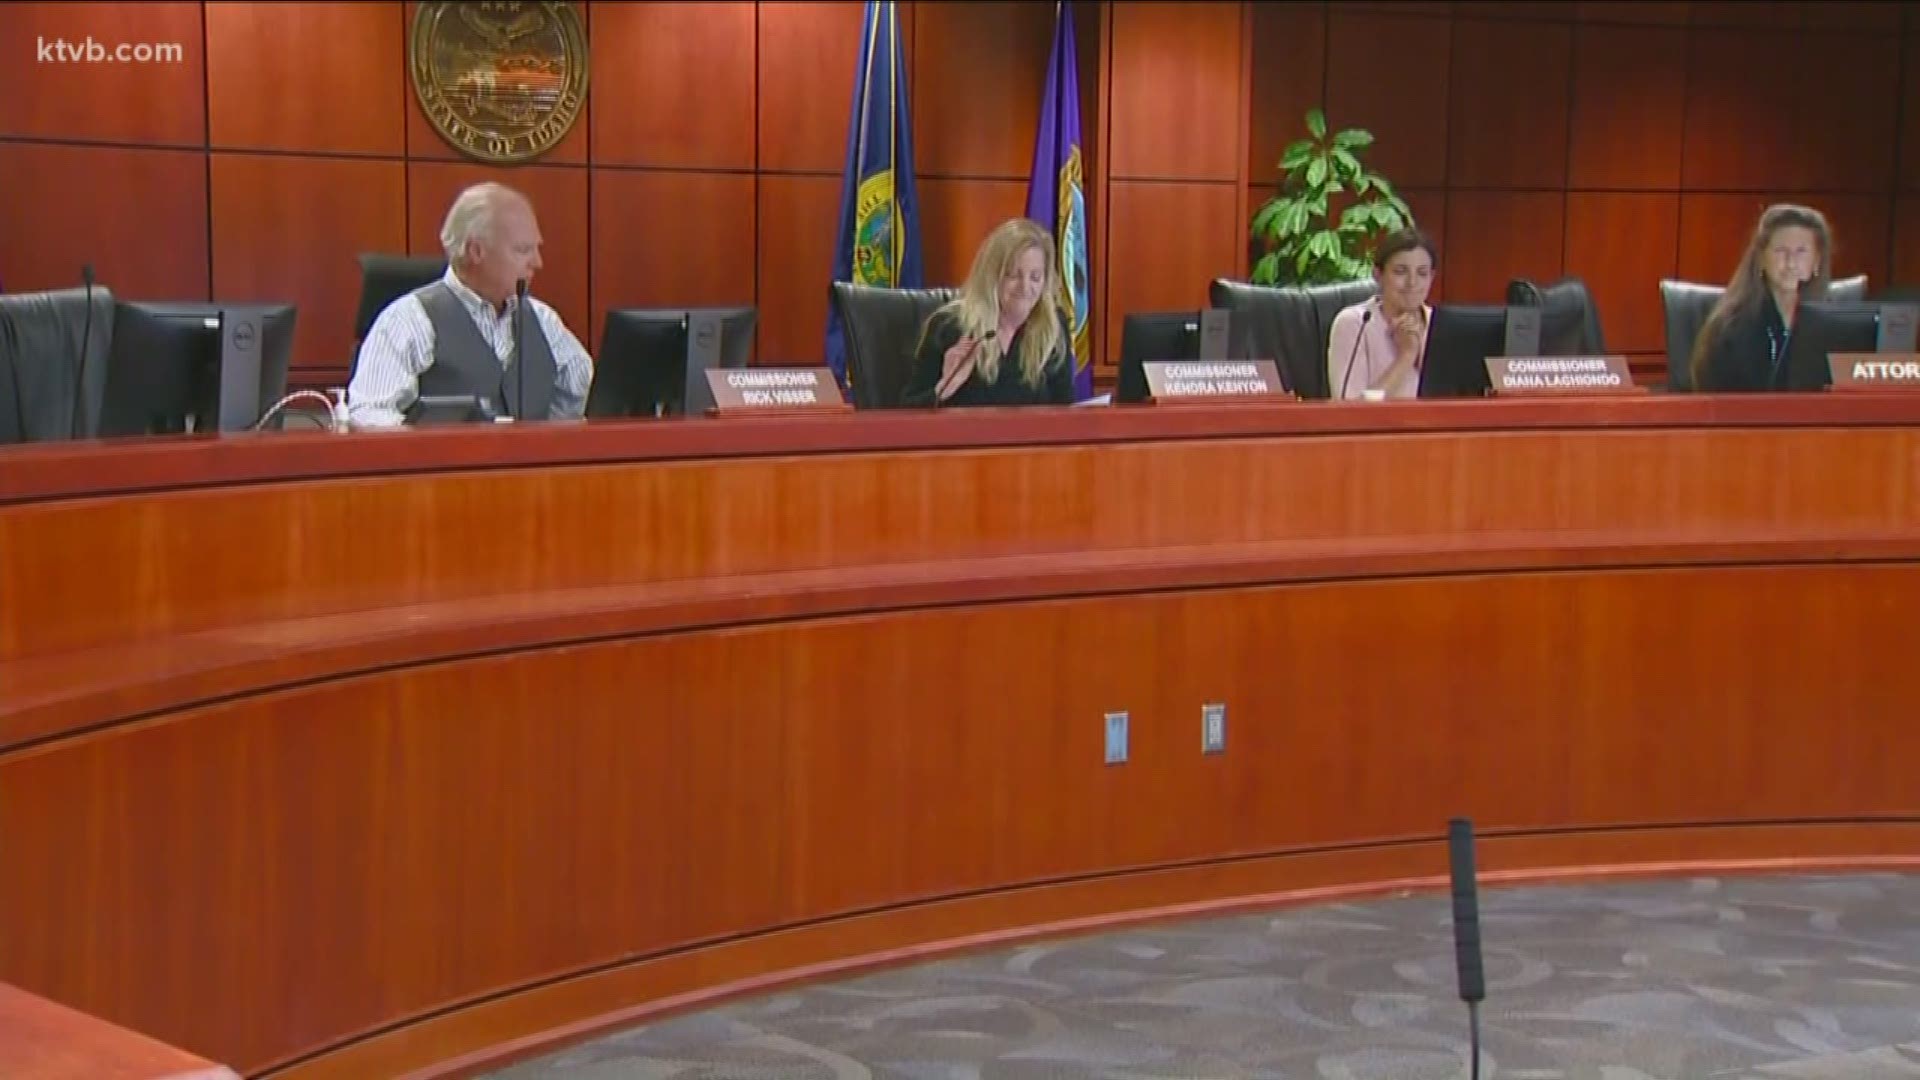 County commissioners voted unanimously in favor of the ordinance, which prohibits discrimination based on sexual orientation and gender identity.